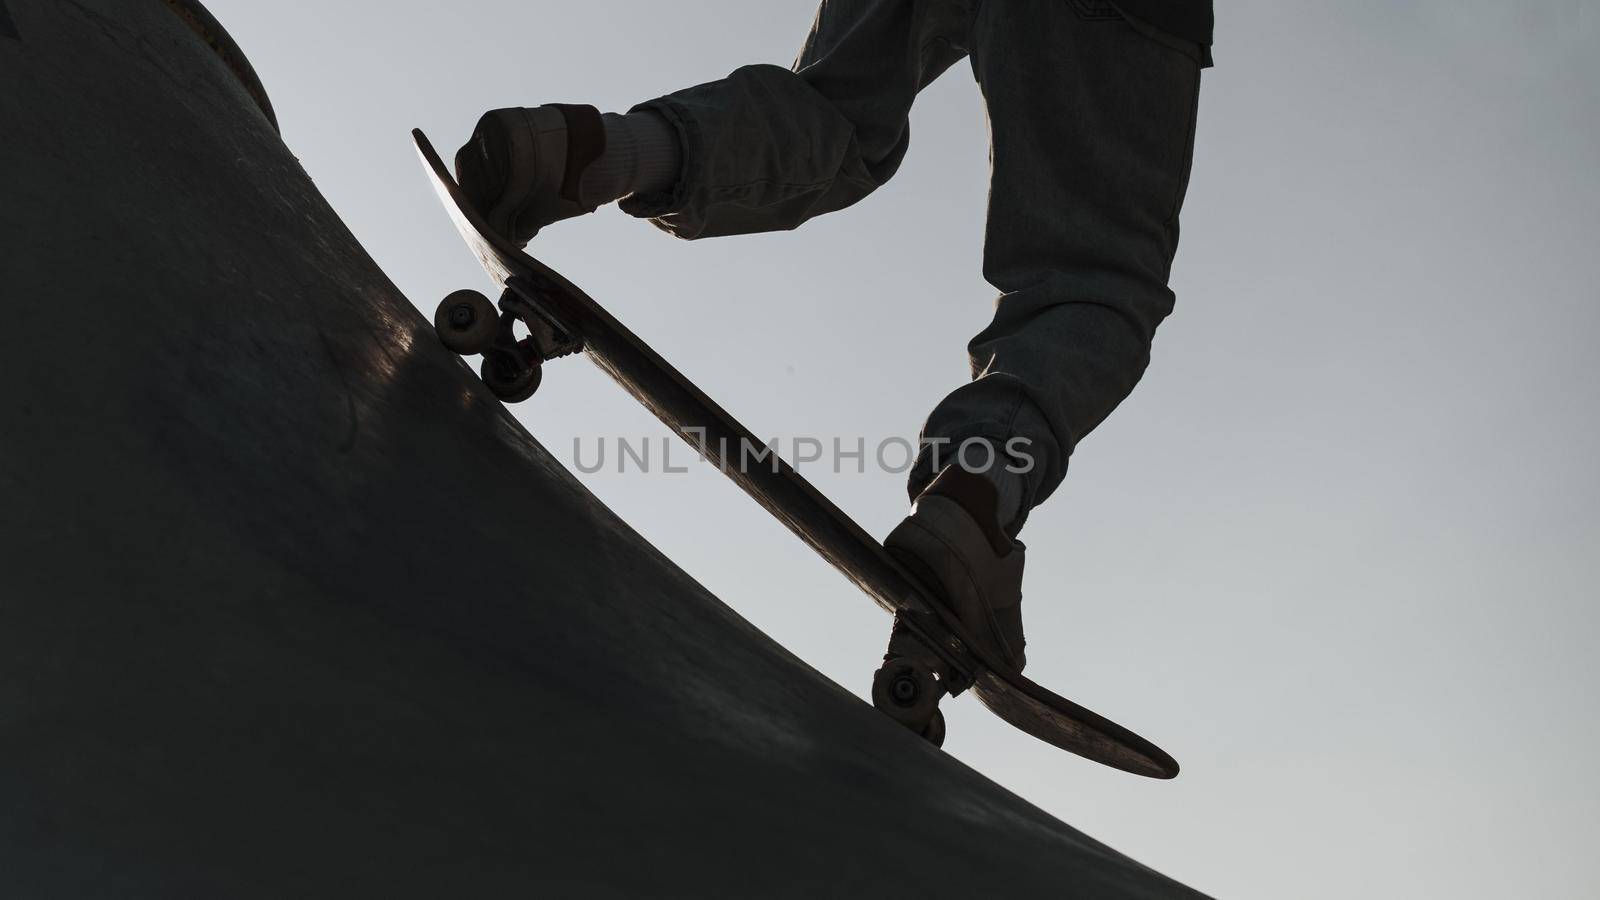 teenager having fun with skateboard park silhouette. High quality beautiful photo concept by Zahard